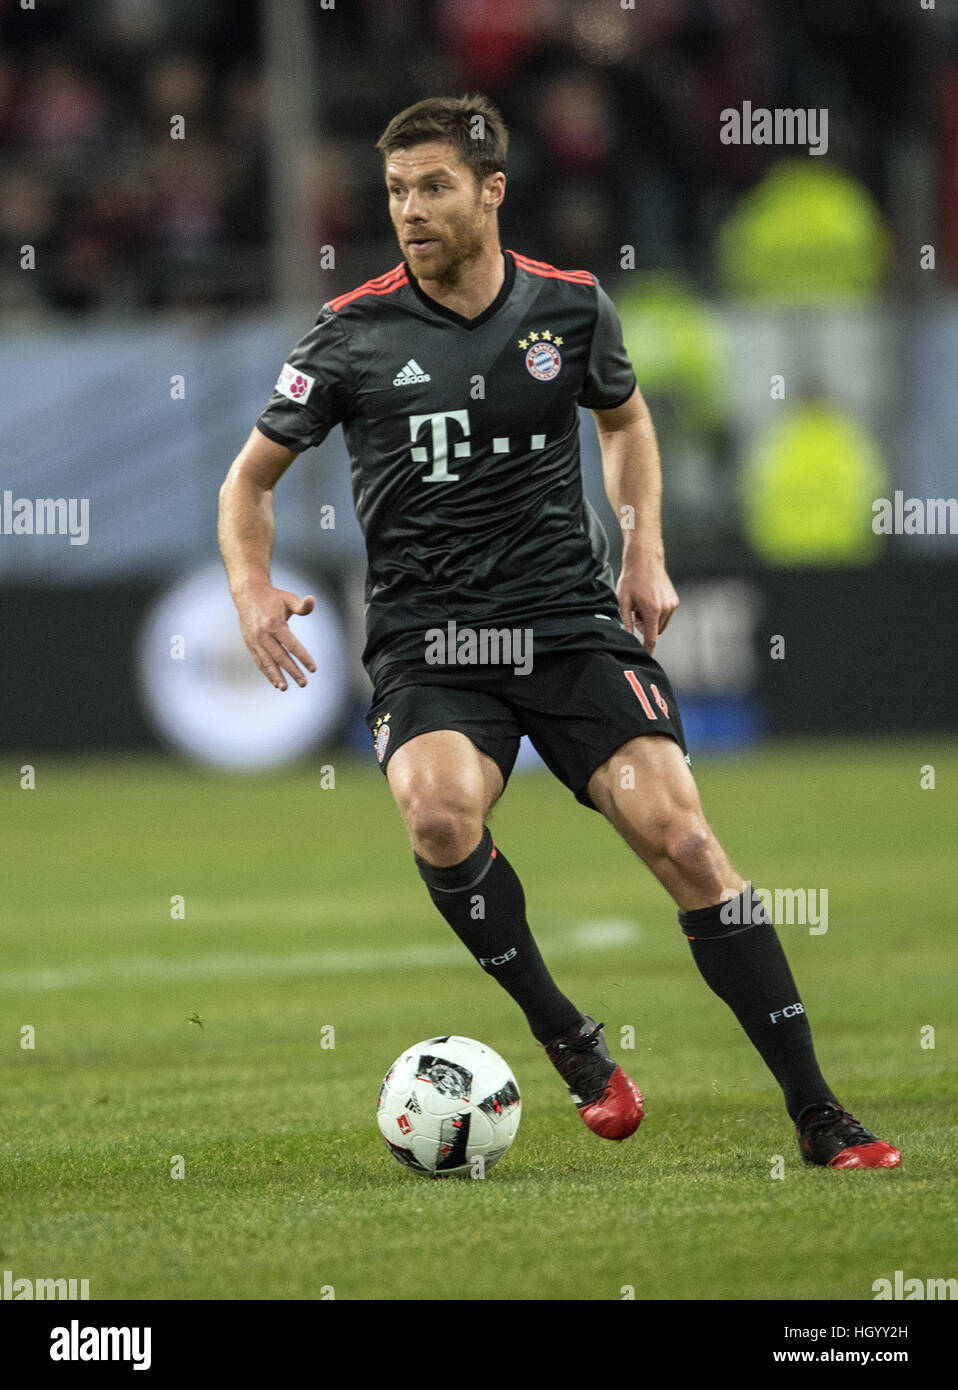 Duesseldorf, Germany. 14th Jan, 2017. Bayern's Xabi Alonso in action during the Telekom Cup soccer match between Fortuna Duesseldorf and Bayern Munich in the ESPRIT arena in Duesseldorf, Germany, 14 January 2017. Photo: Federico Gambarini/dpa/Alamy Live News Stock Photo